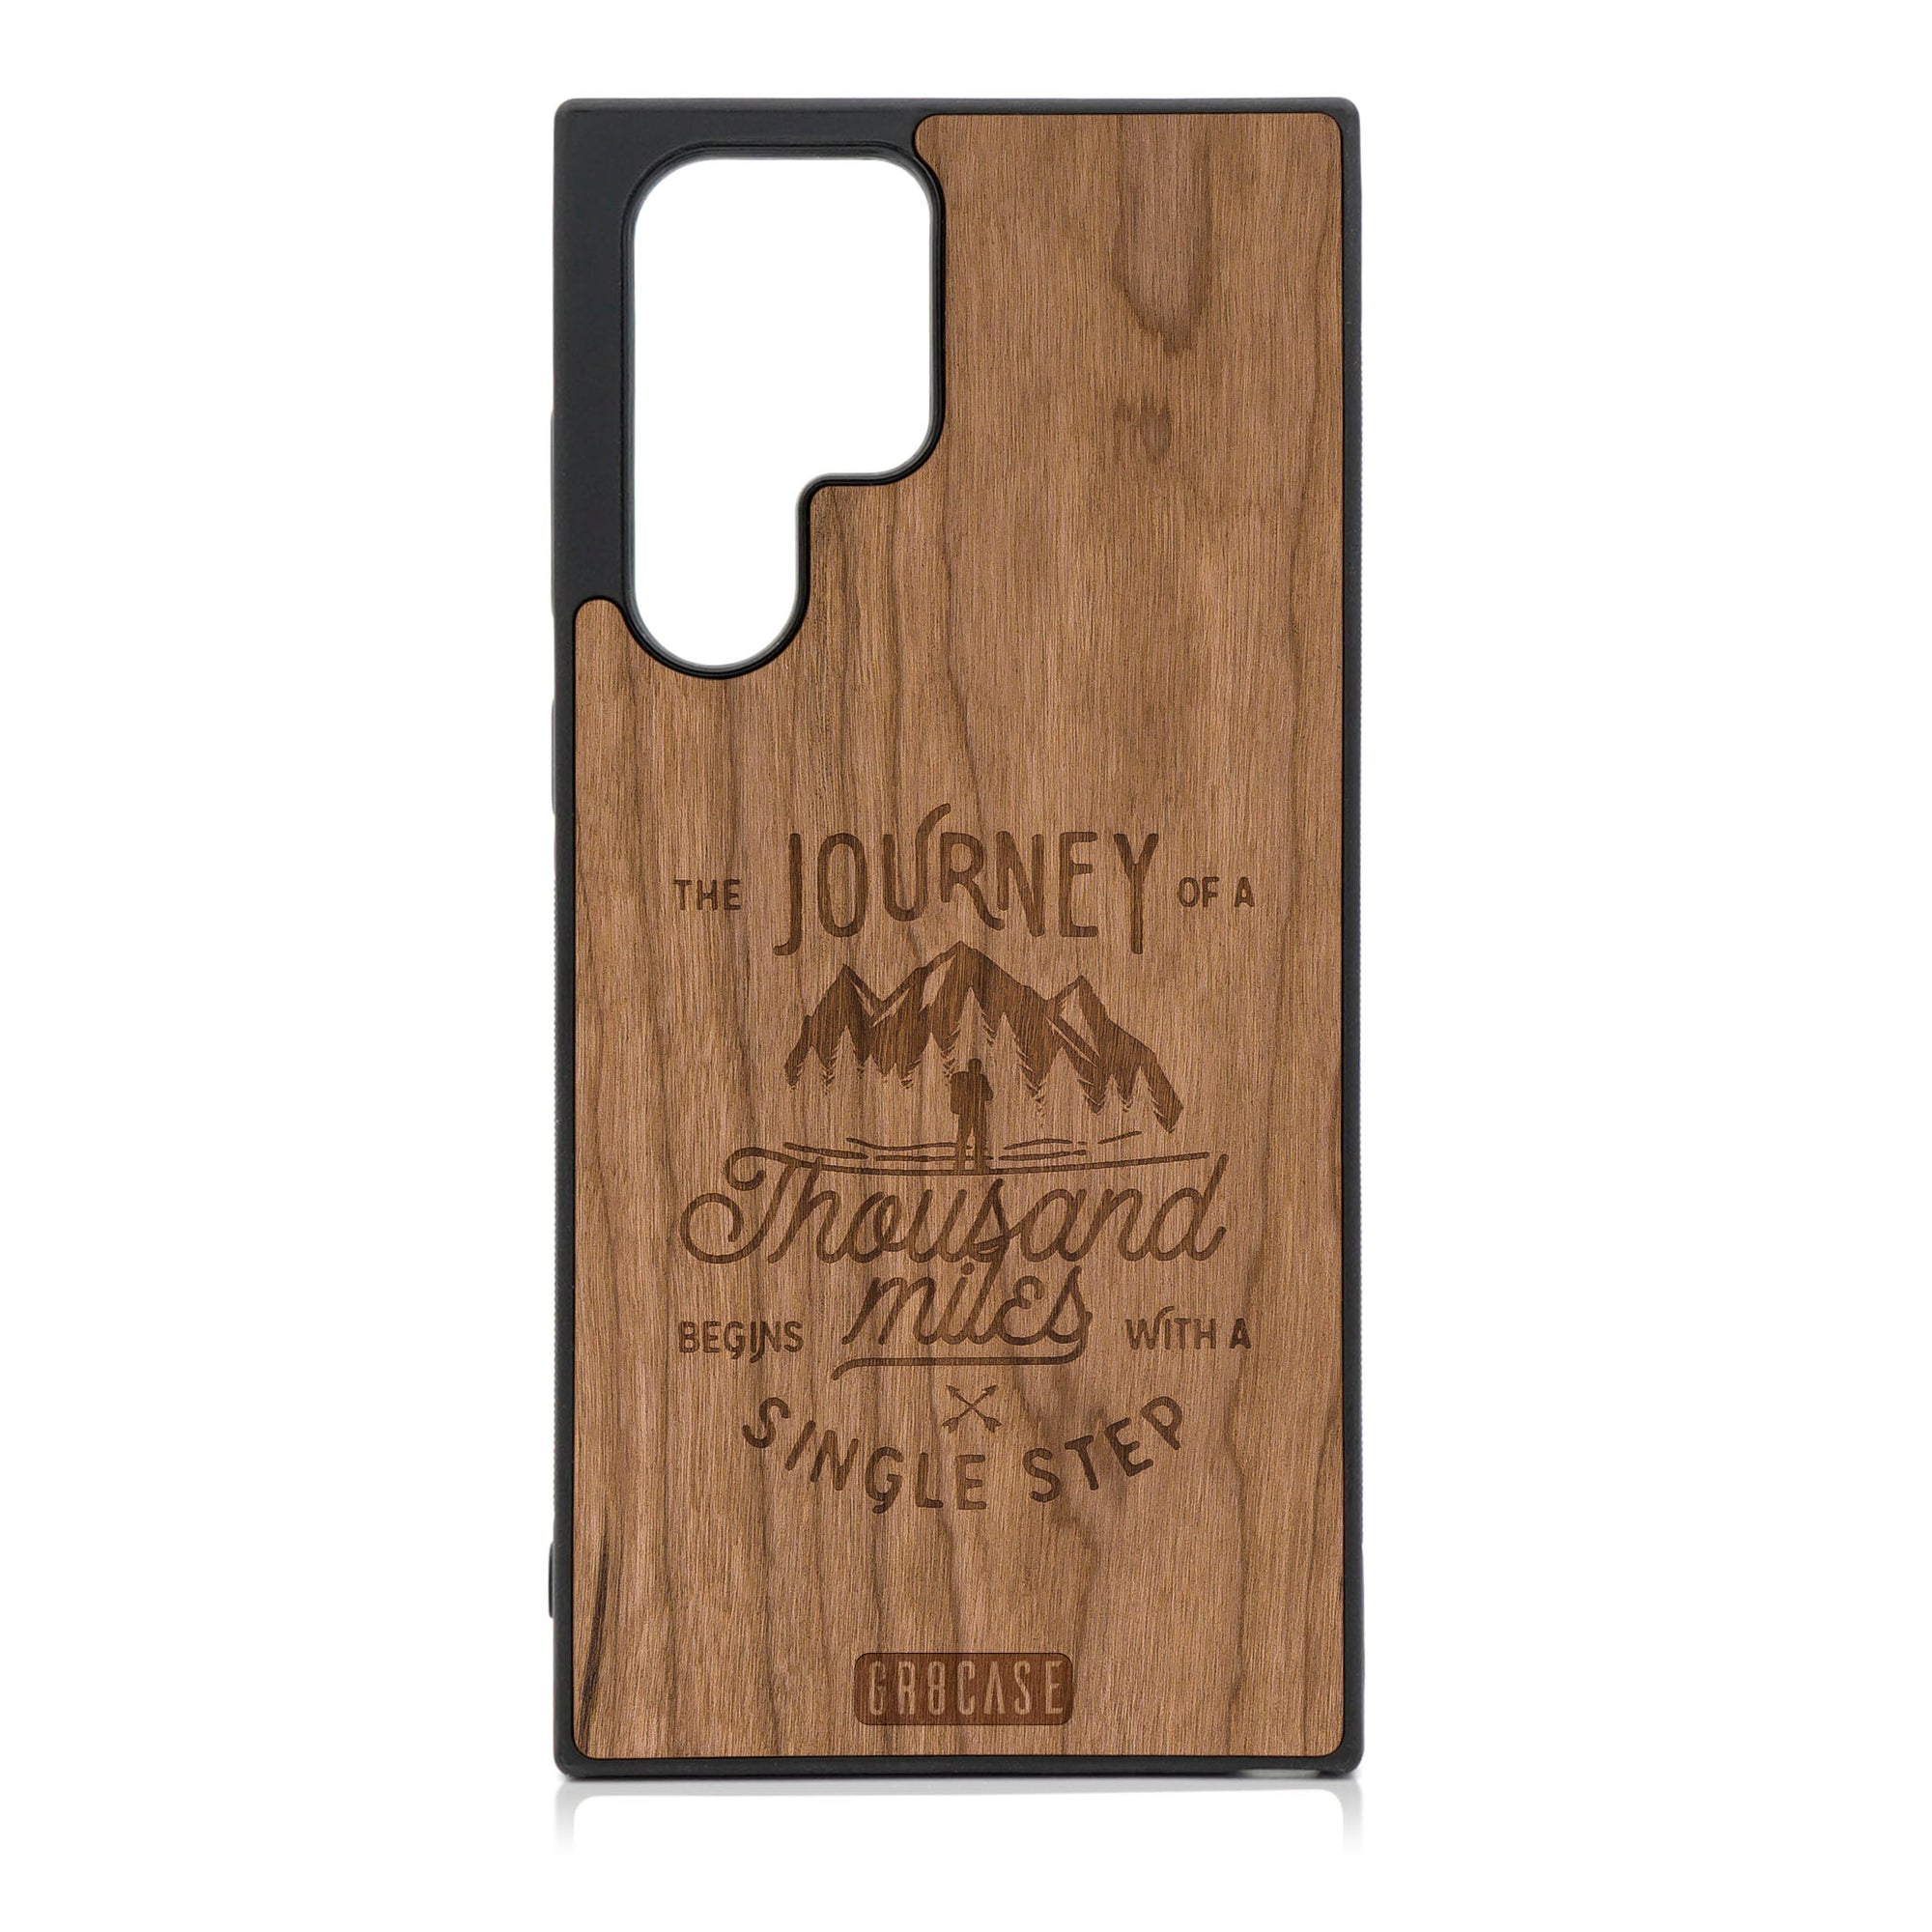 The Journey Of A Thousand Miles Begins With A Single Step Design Wood Case For Galaxy S22 Ultra